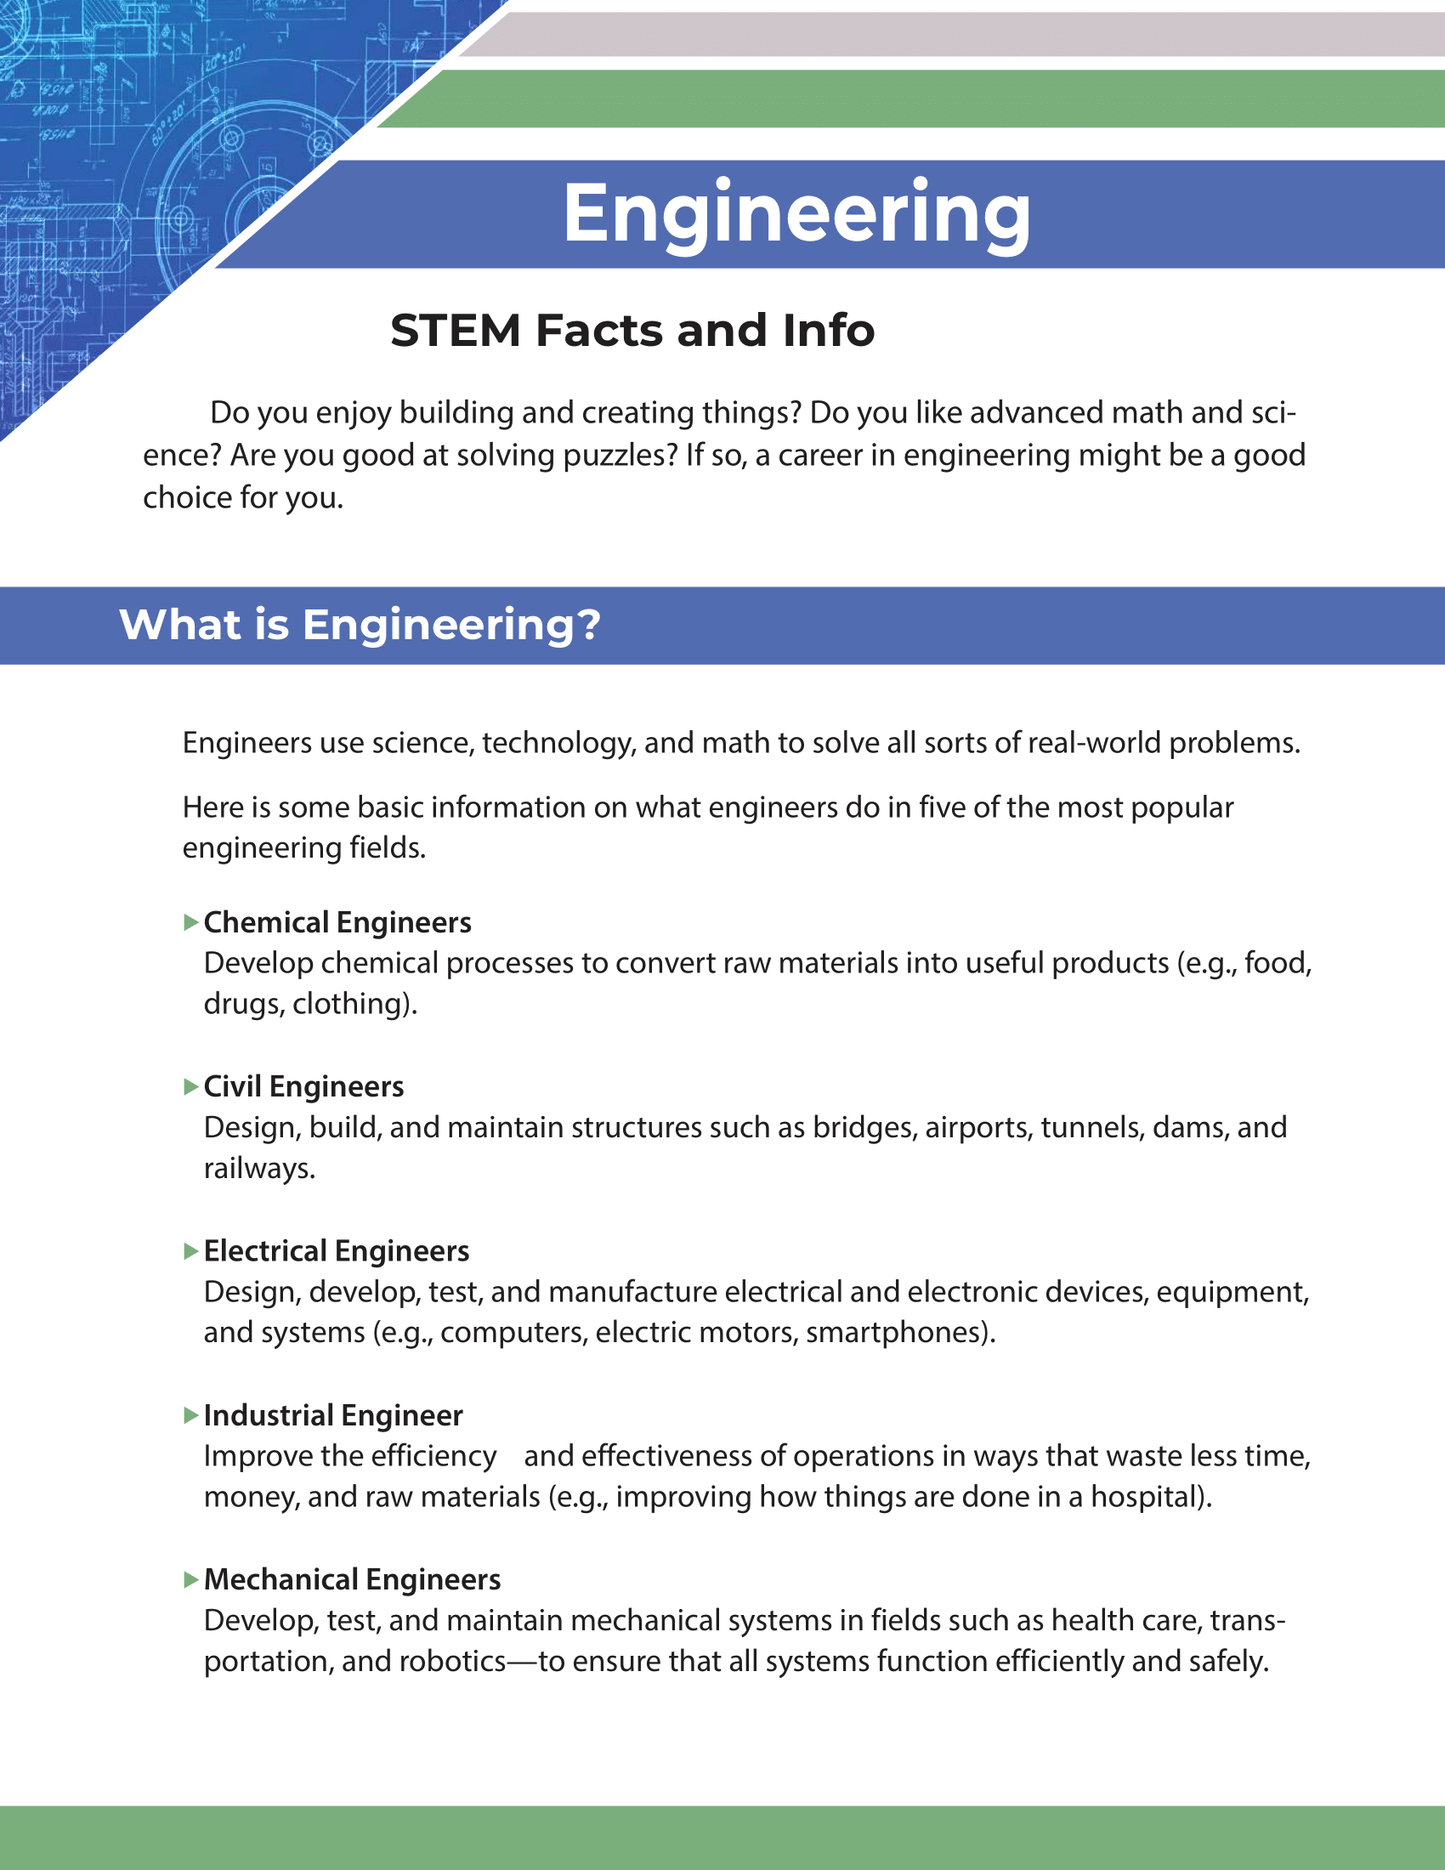 STEM Facts and Info - Engineering